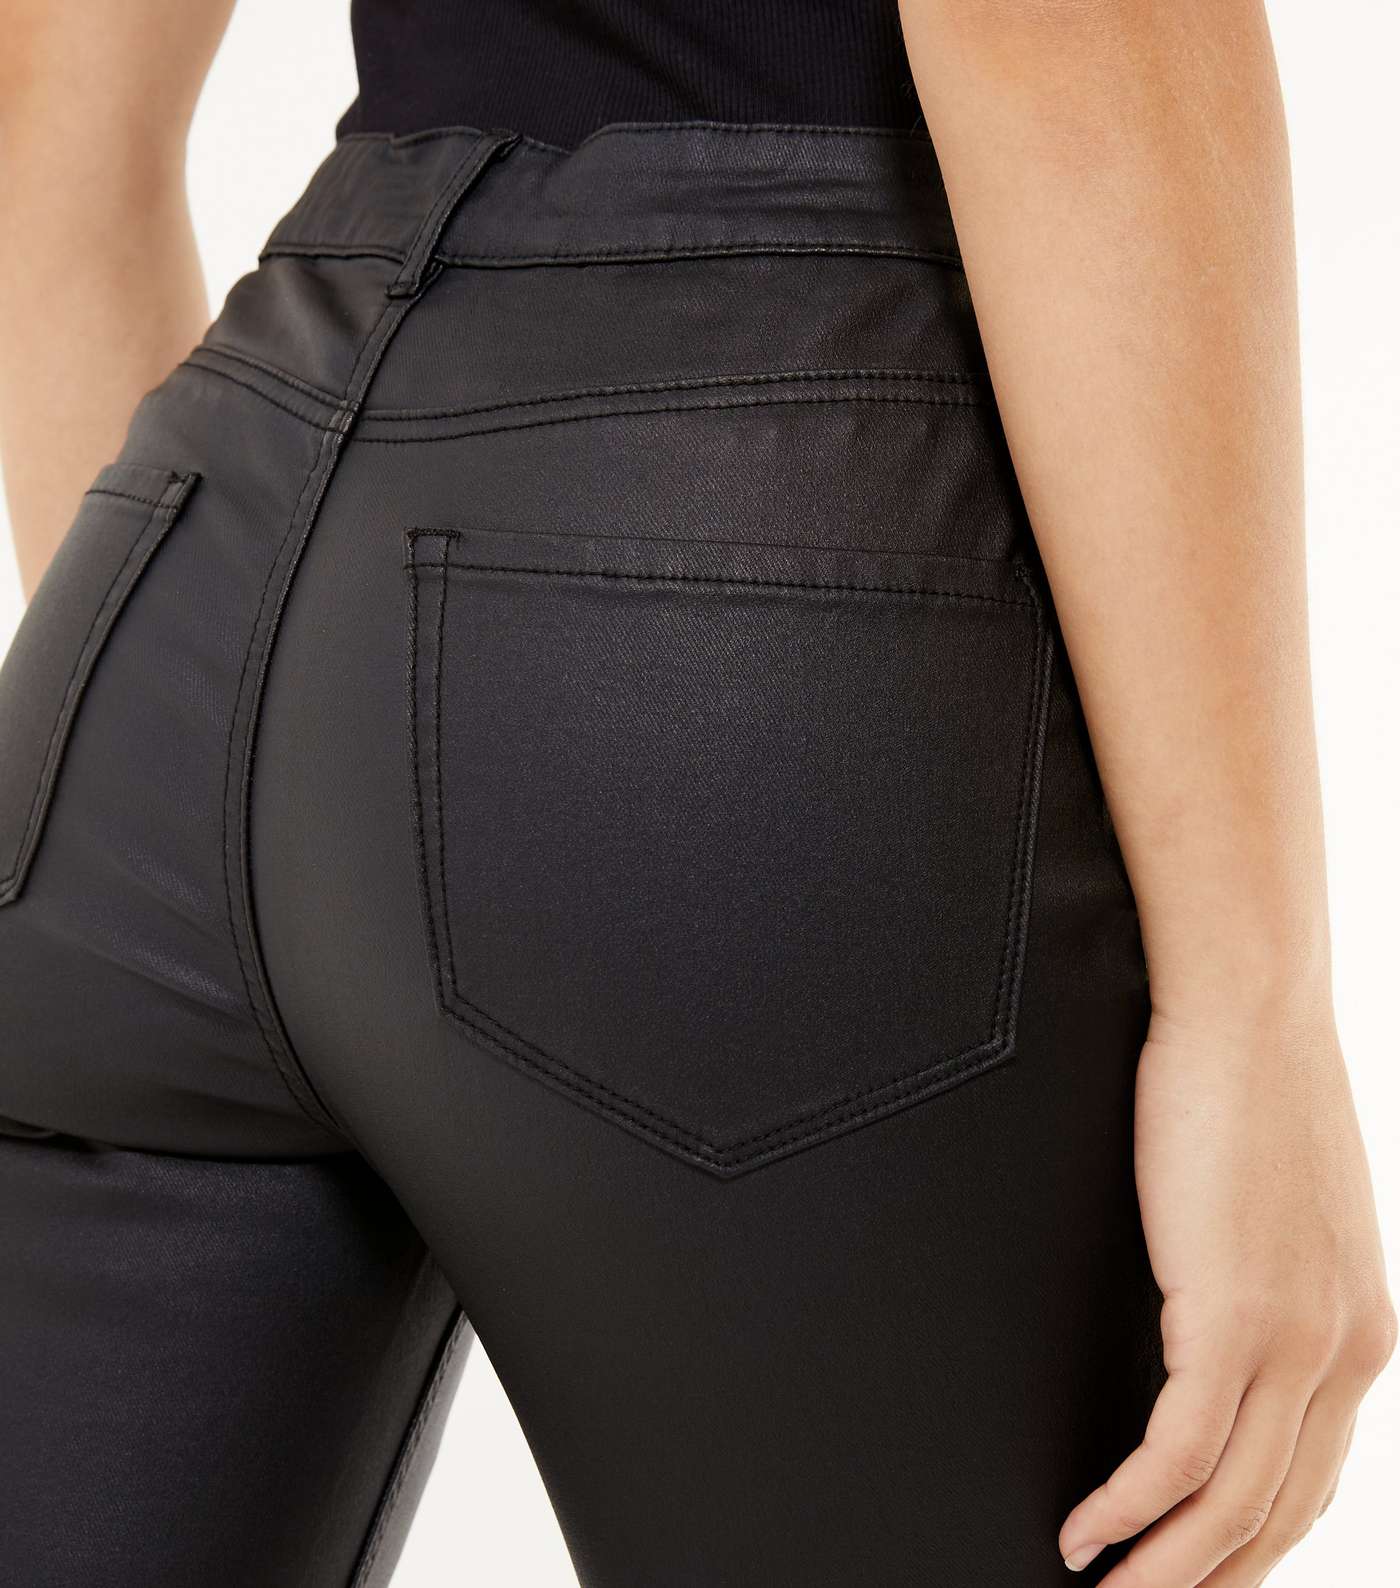 Urban Bliss Black Leather-Look High Waist Skinny Jeans  Image 4